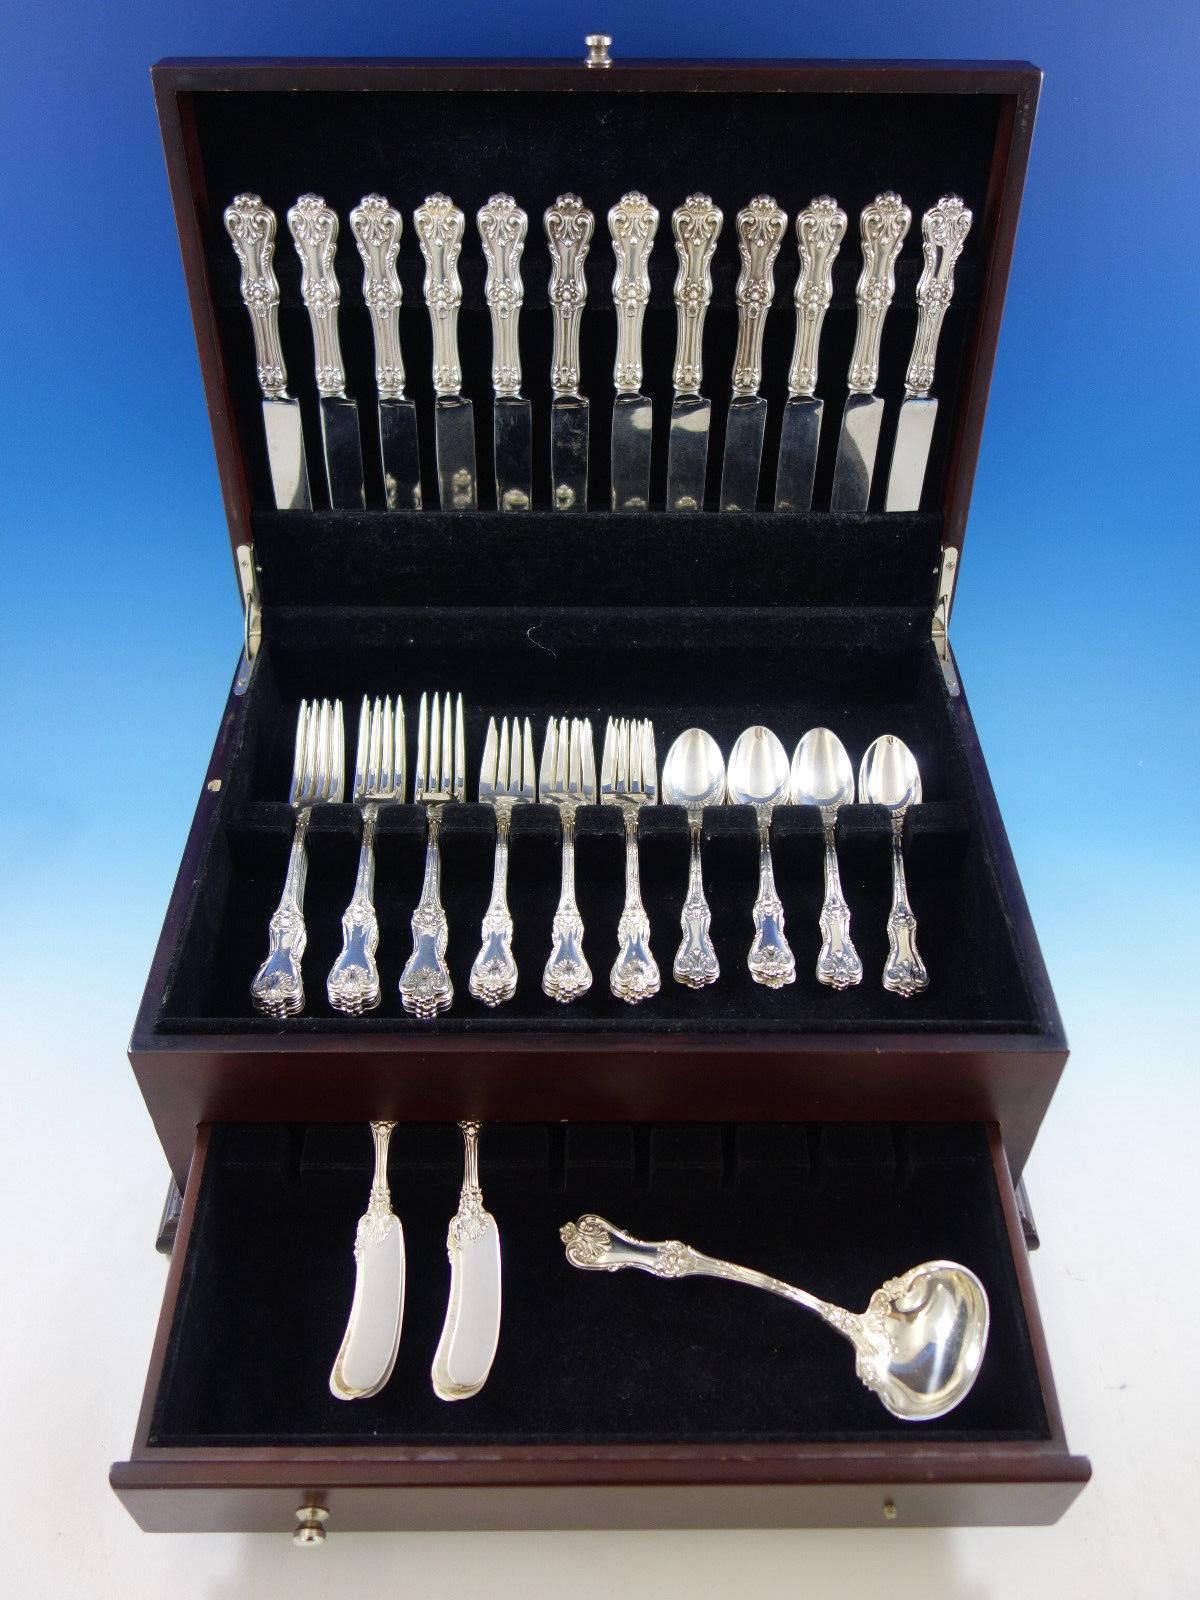 Federal Cotillion by Frank Smith sterling silver flatware set of 61 pieces. This set includes: 

12 knives, 8 1/2